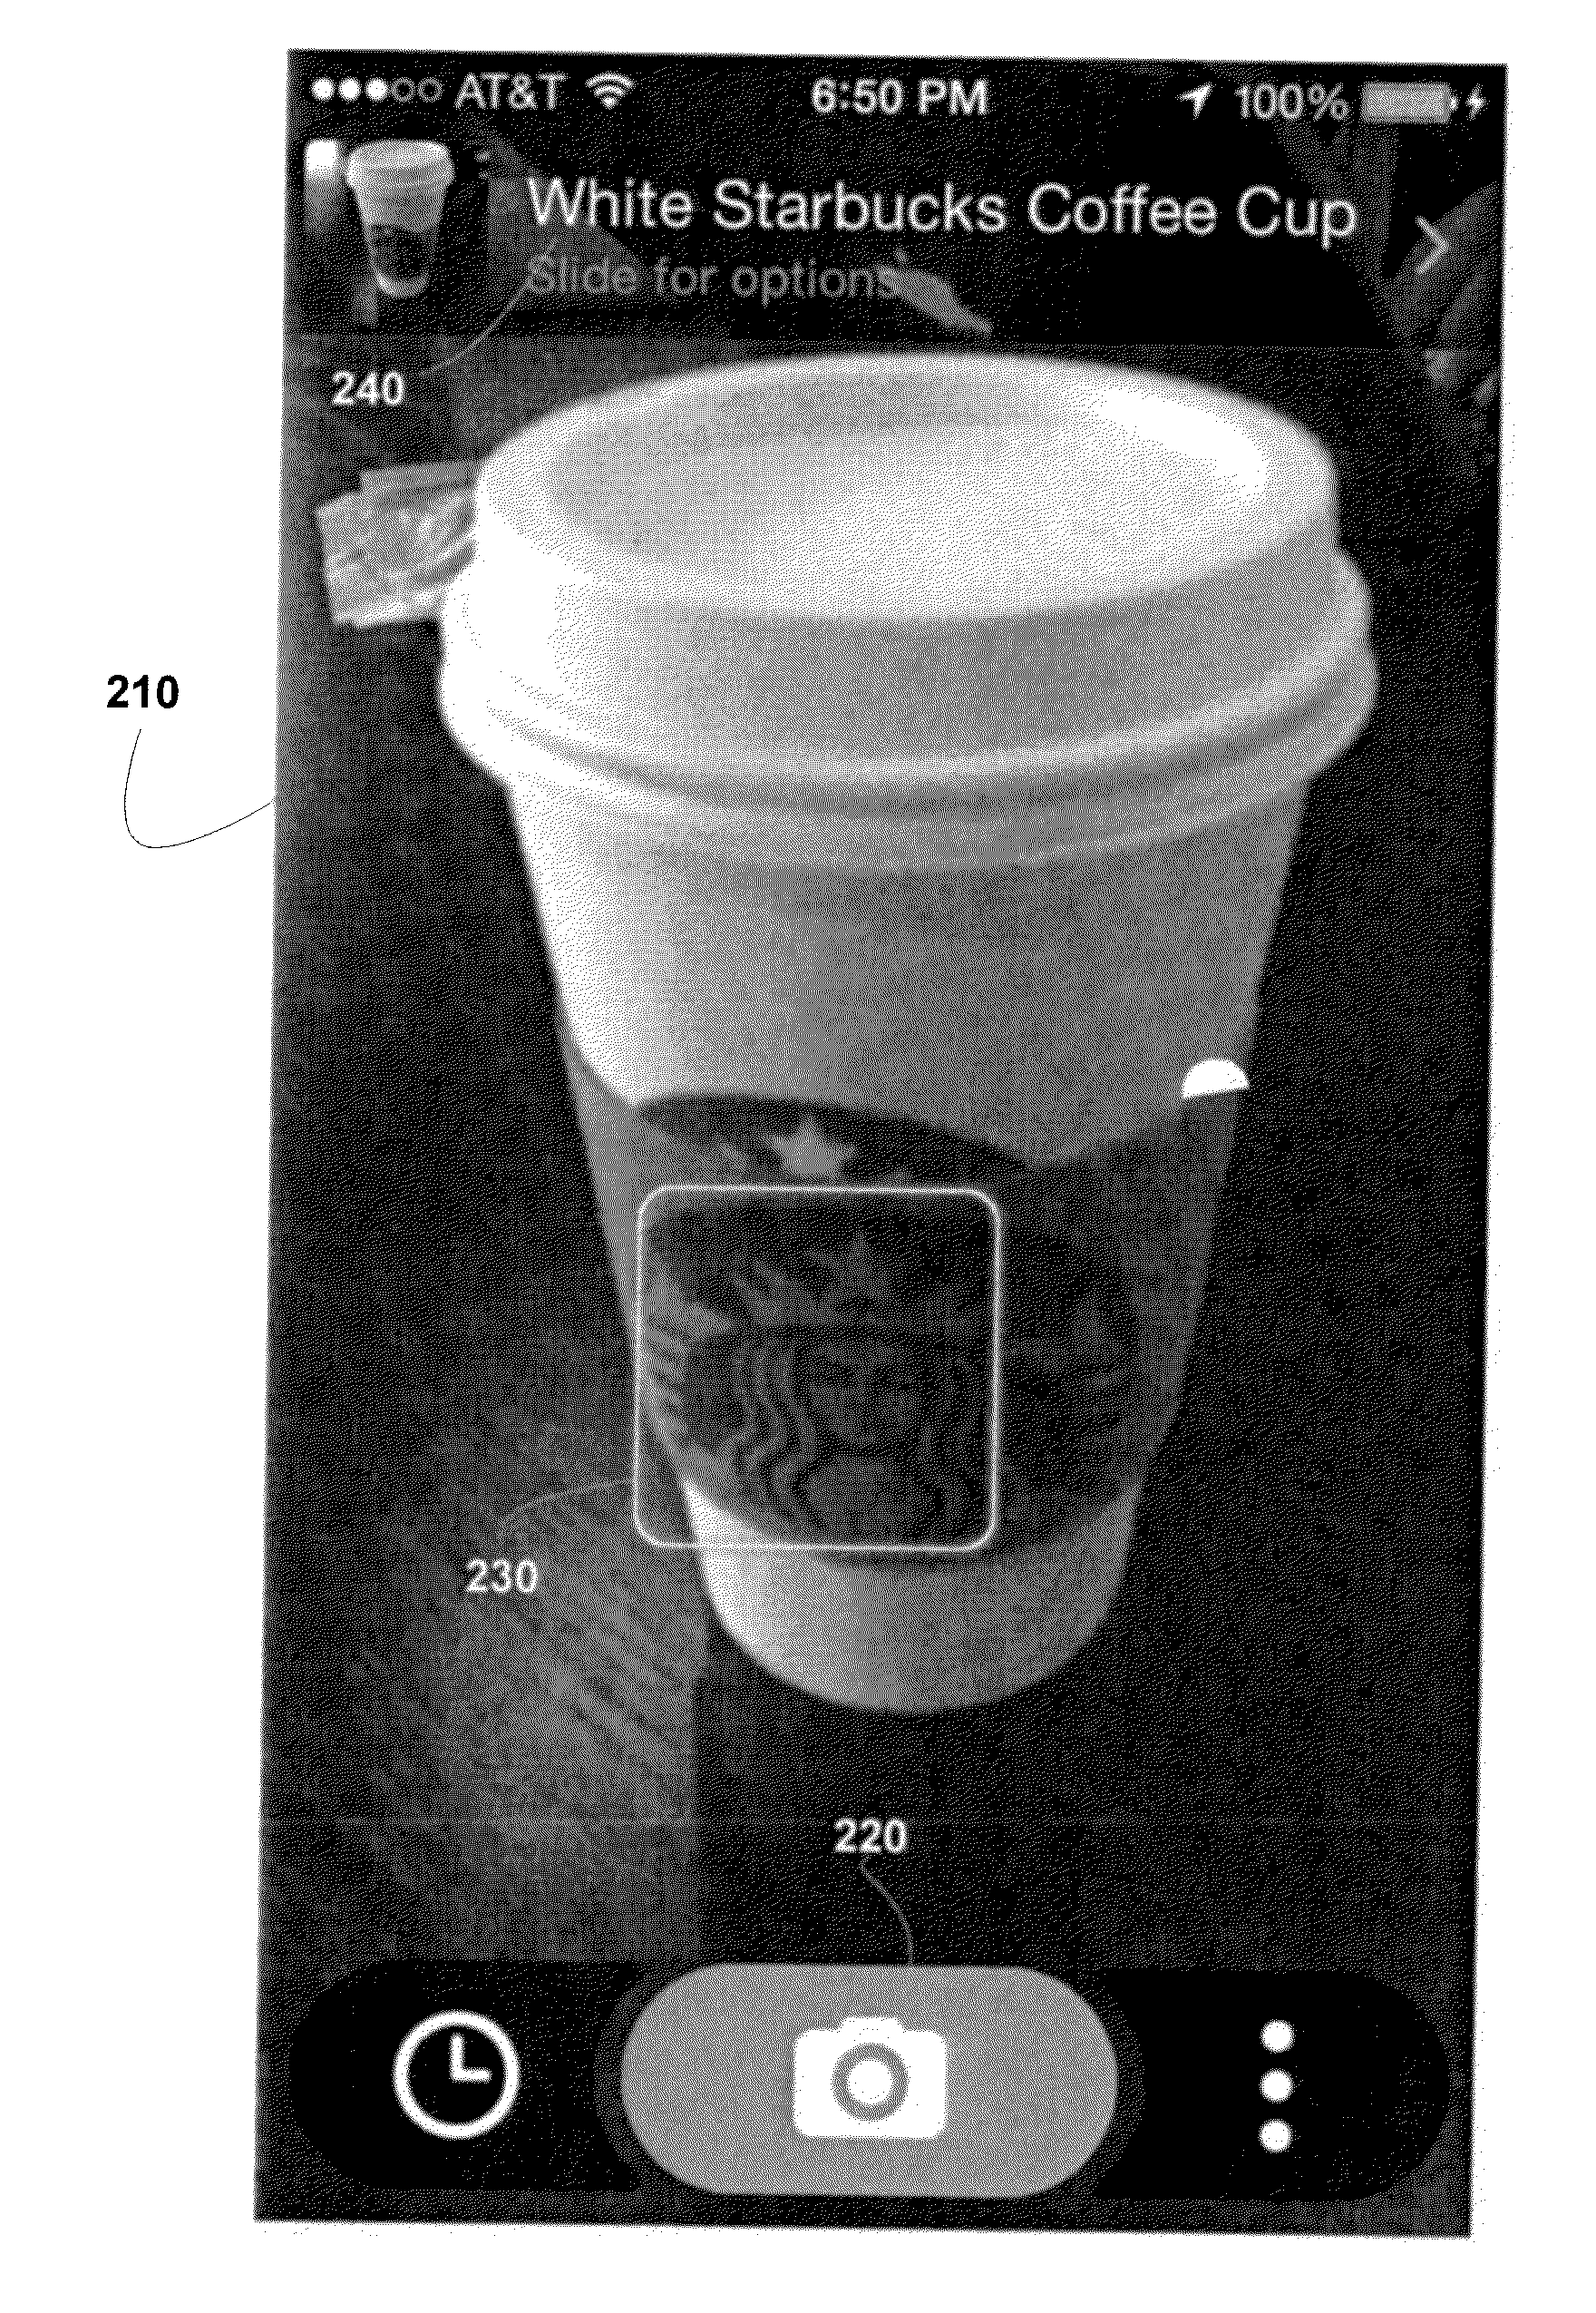 Image Processing Including Object Selection